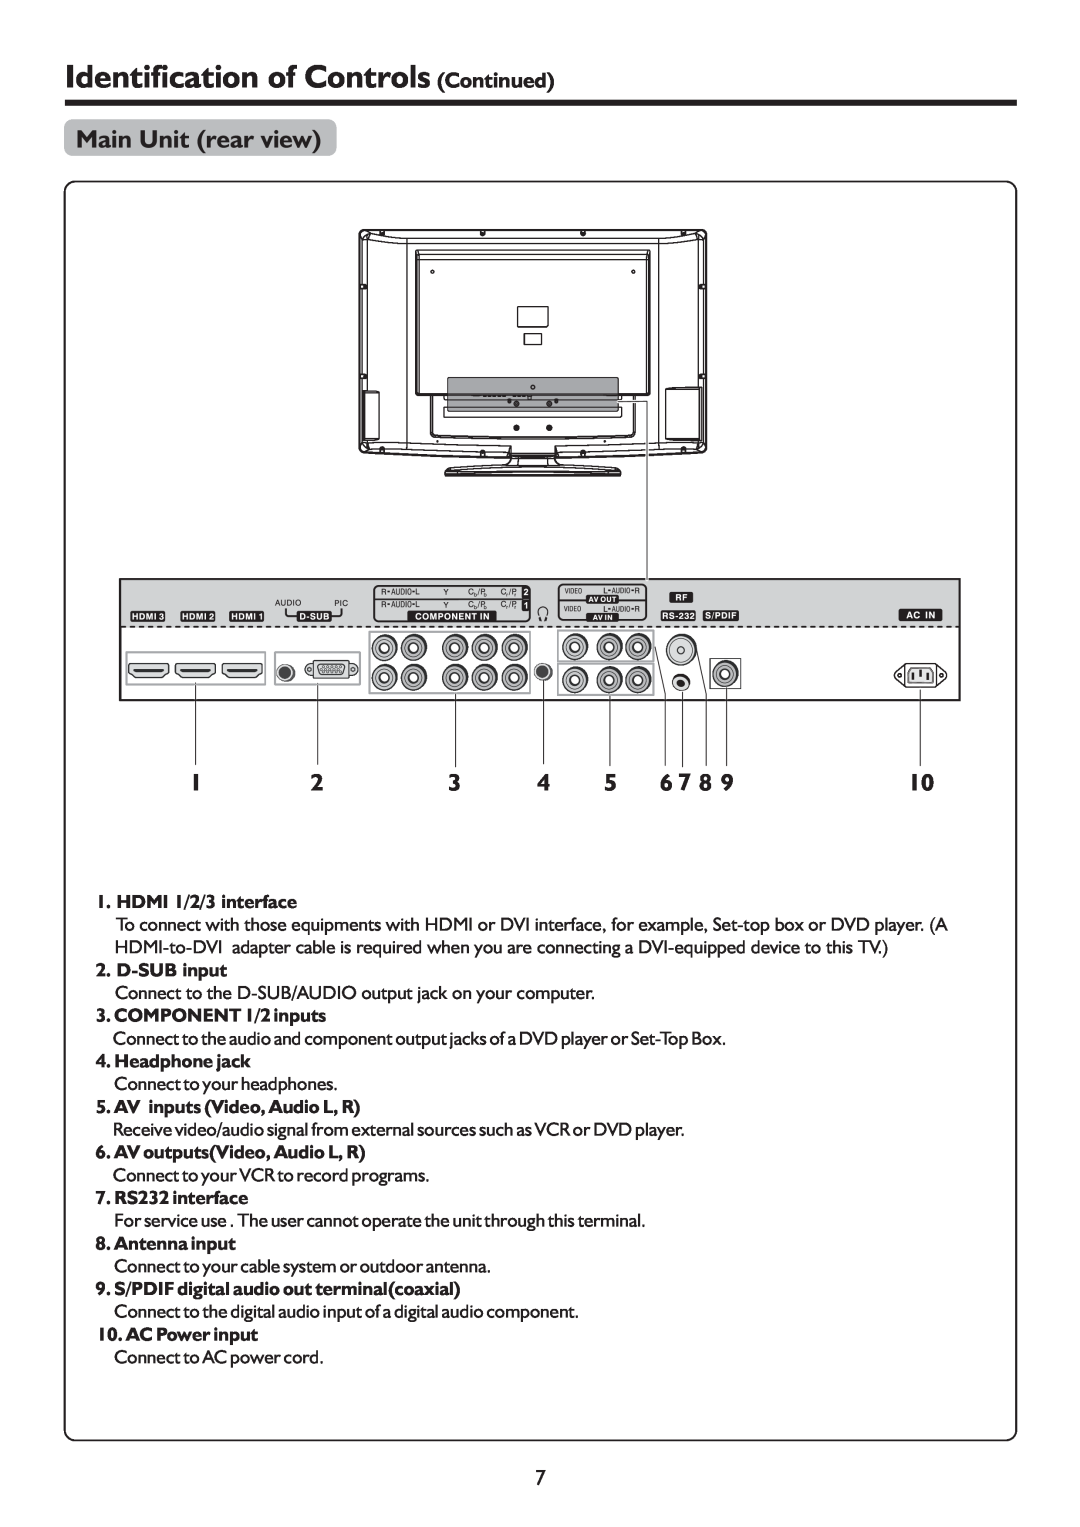 Palsonic TFTV4200FHD Identification of Controls Continued, Main Unit rear view, 6 7 8, HDMI 1/2/3 interface, D-SUB input 